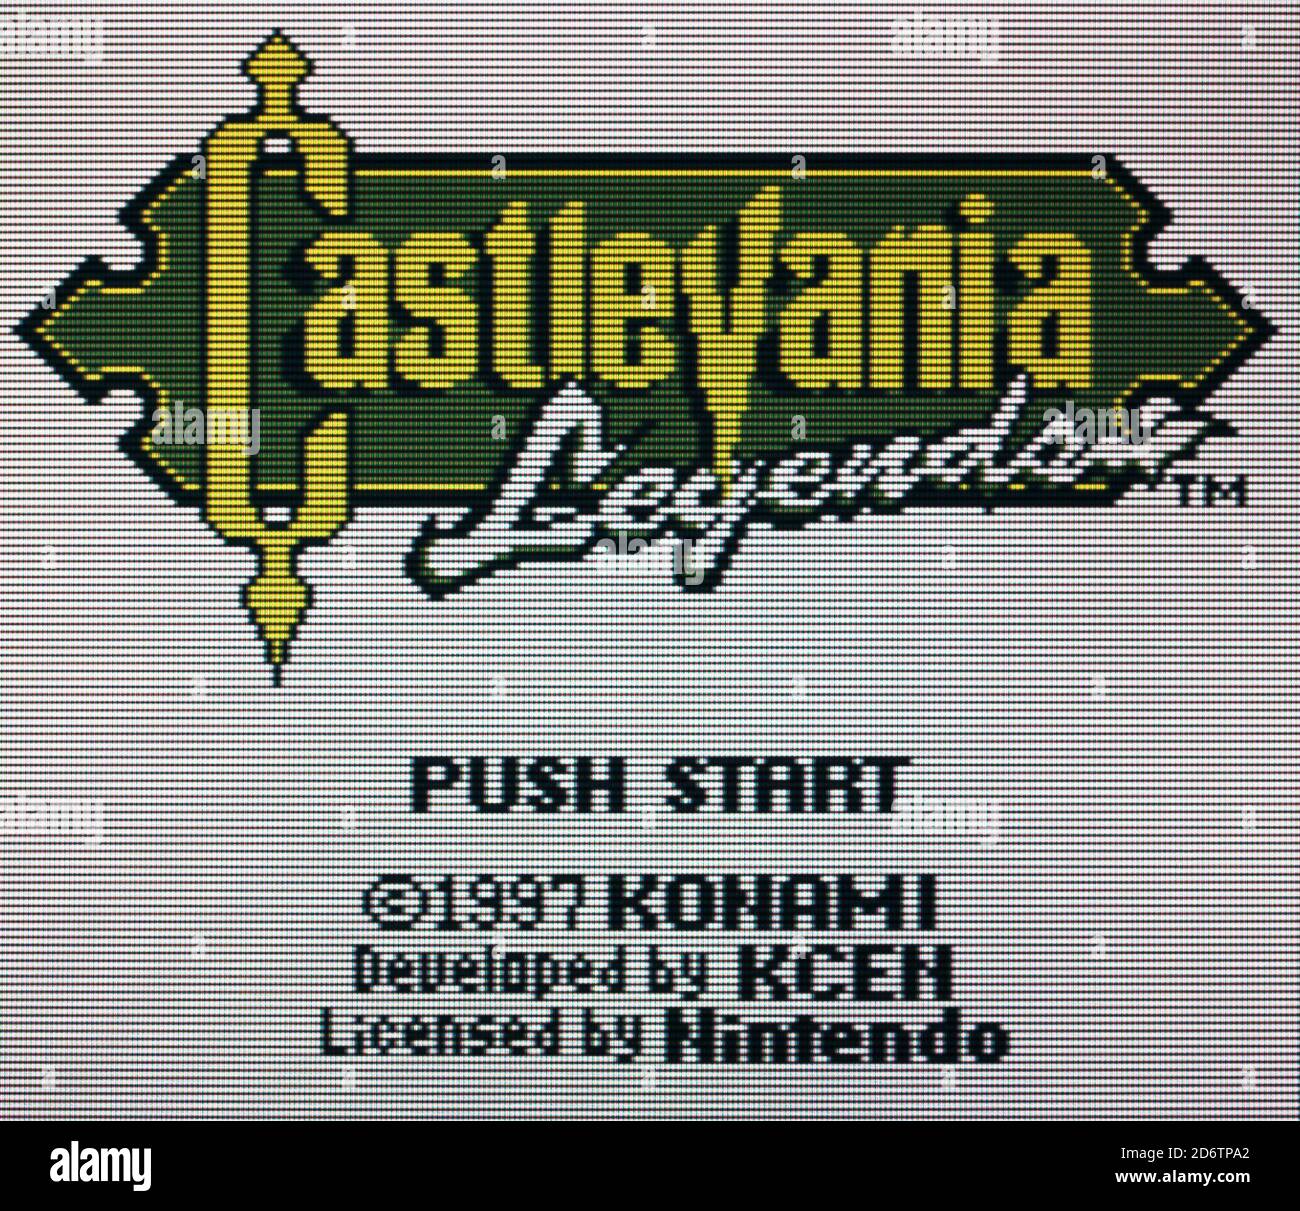 Castlevania Legends - Nintendo Gameboy Videogame - Editorial use only Stock Photo